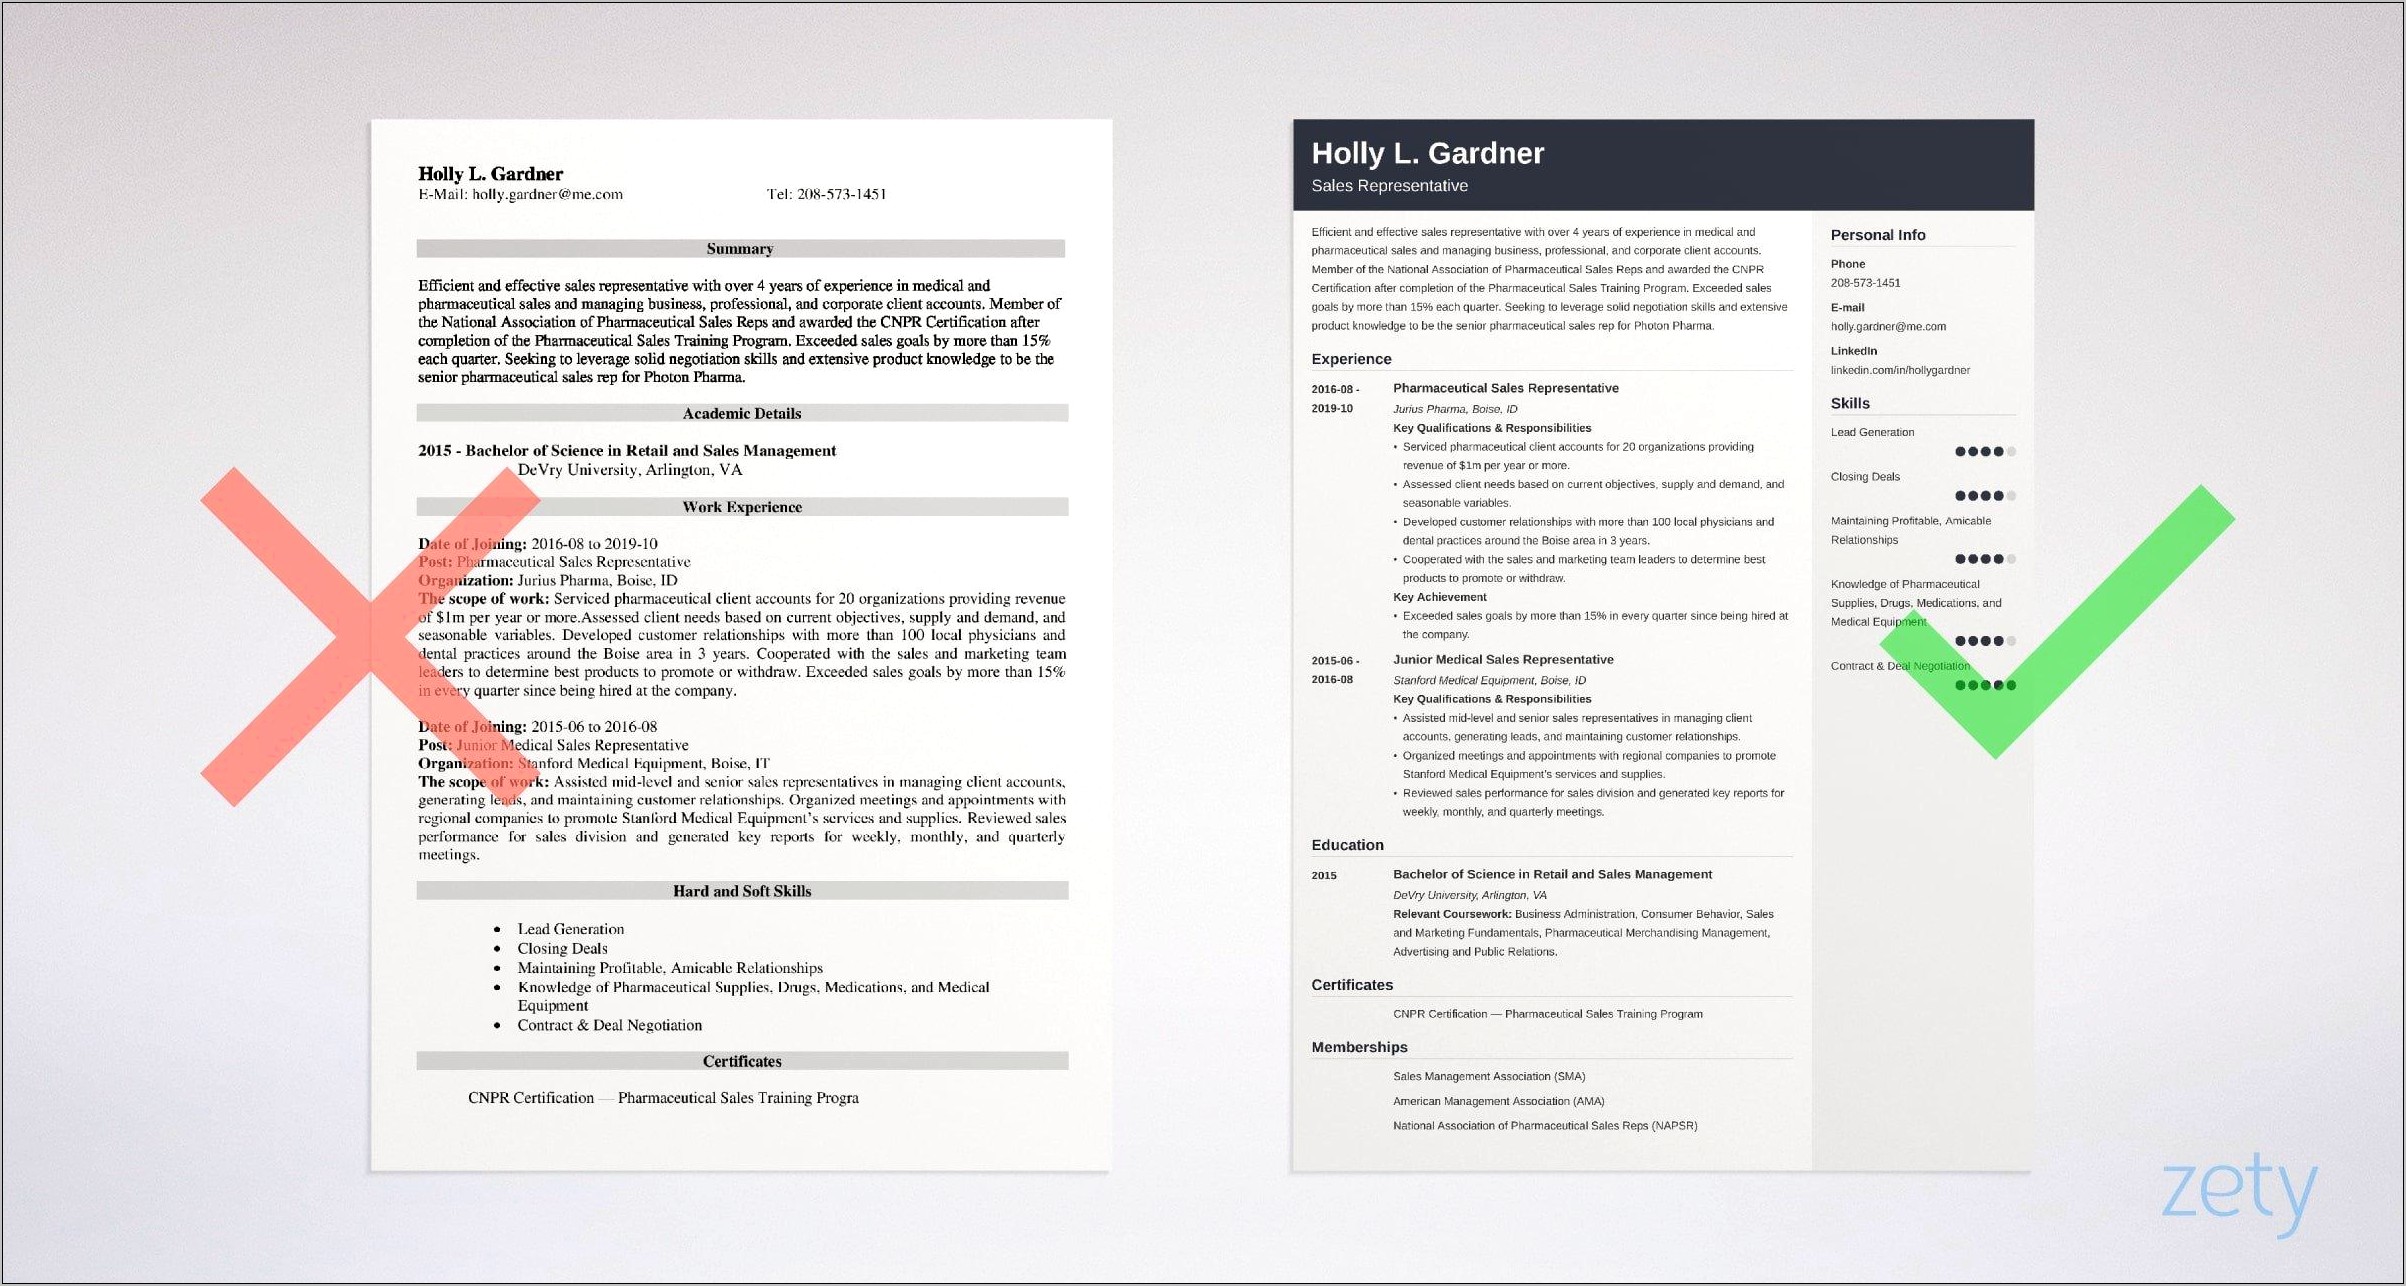 Resume Format For Sales Jobs